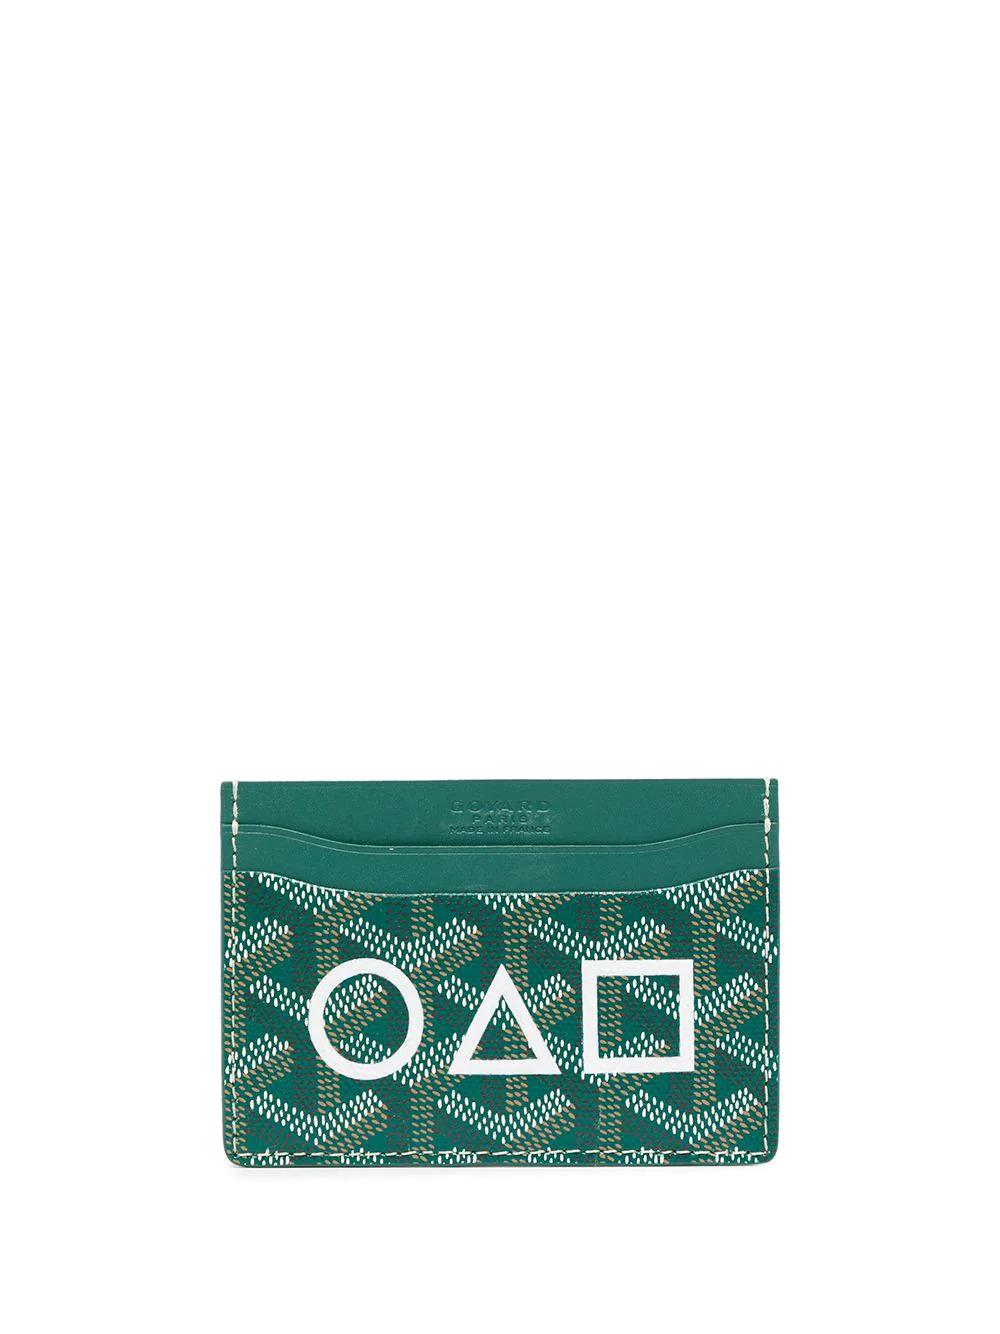 Crafted from Goyardine Canvas, a coloured textile made from cotton, linen and hemp, this pre-owned green monogram cardholder from Goyard is adorned with the Squid Game cartoon motif. Hand-painted as a part of Rewind Vintage's Emotional Baggage